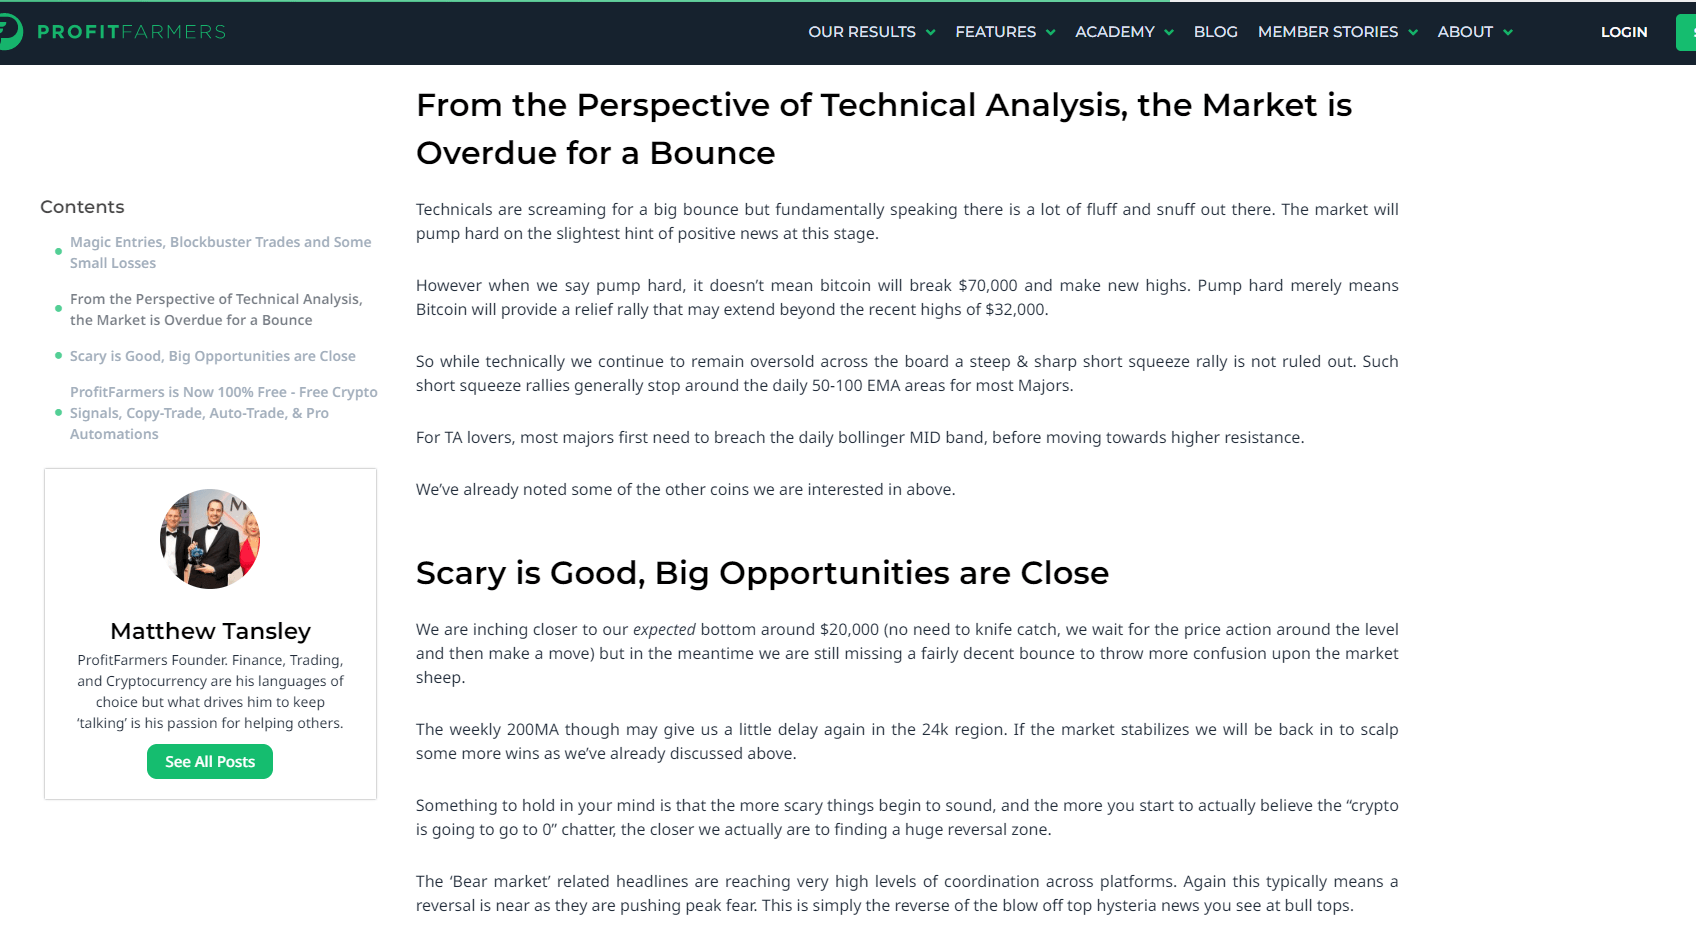 from perspective of technical analysis